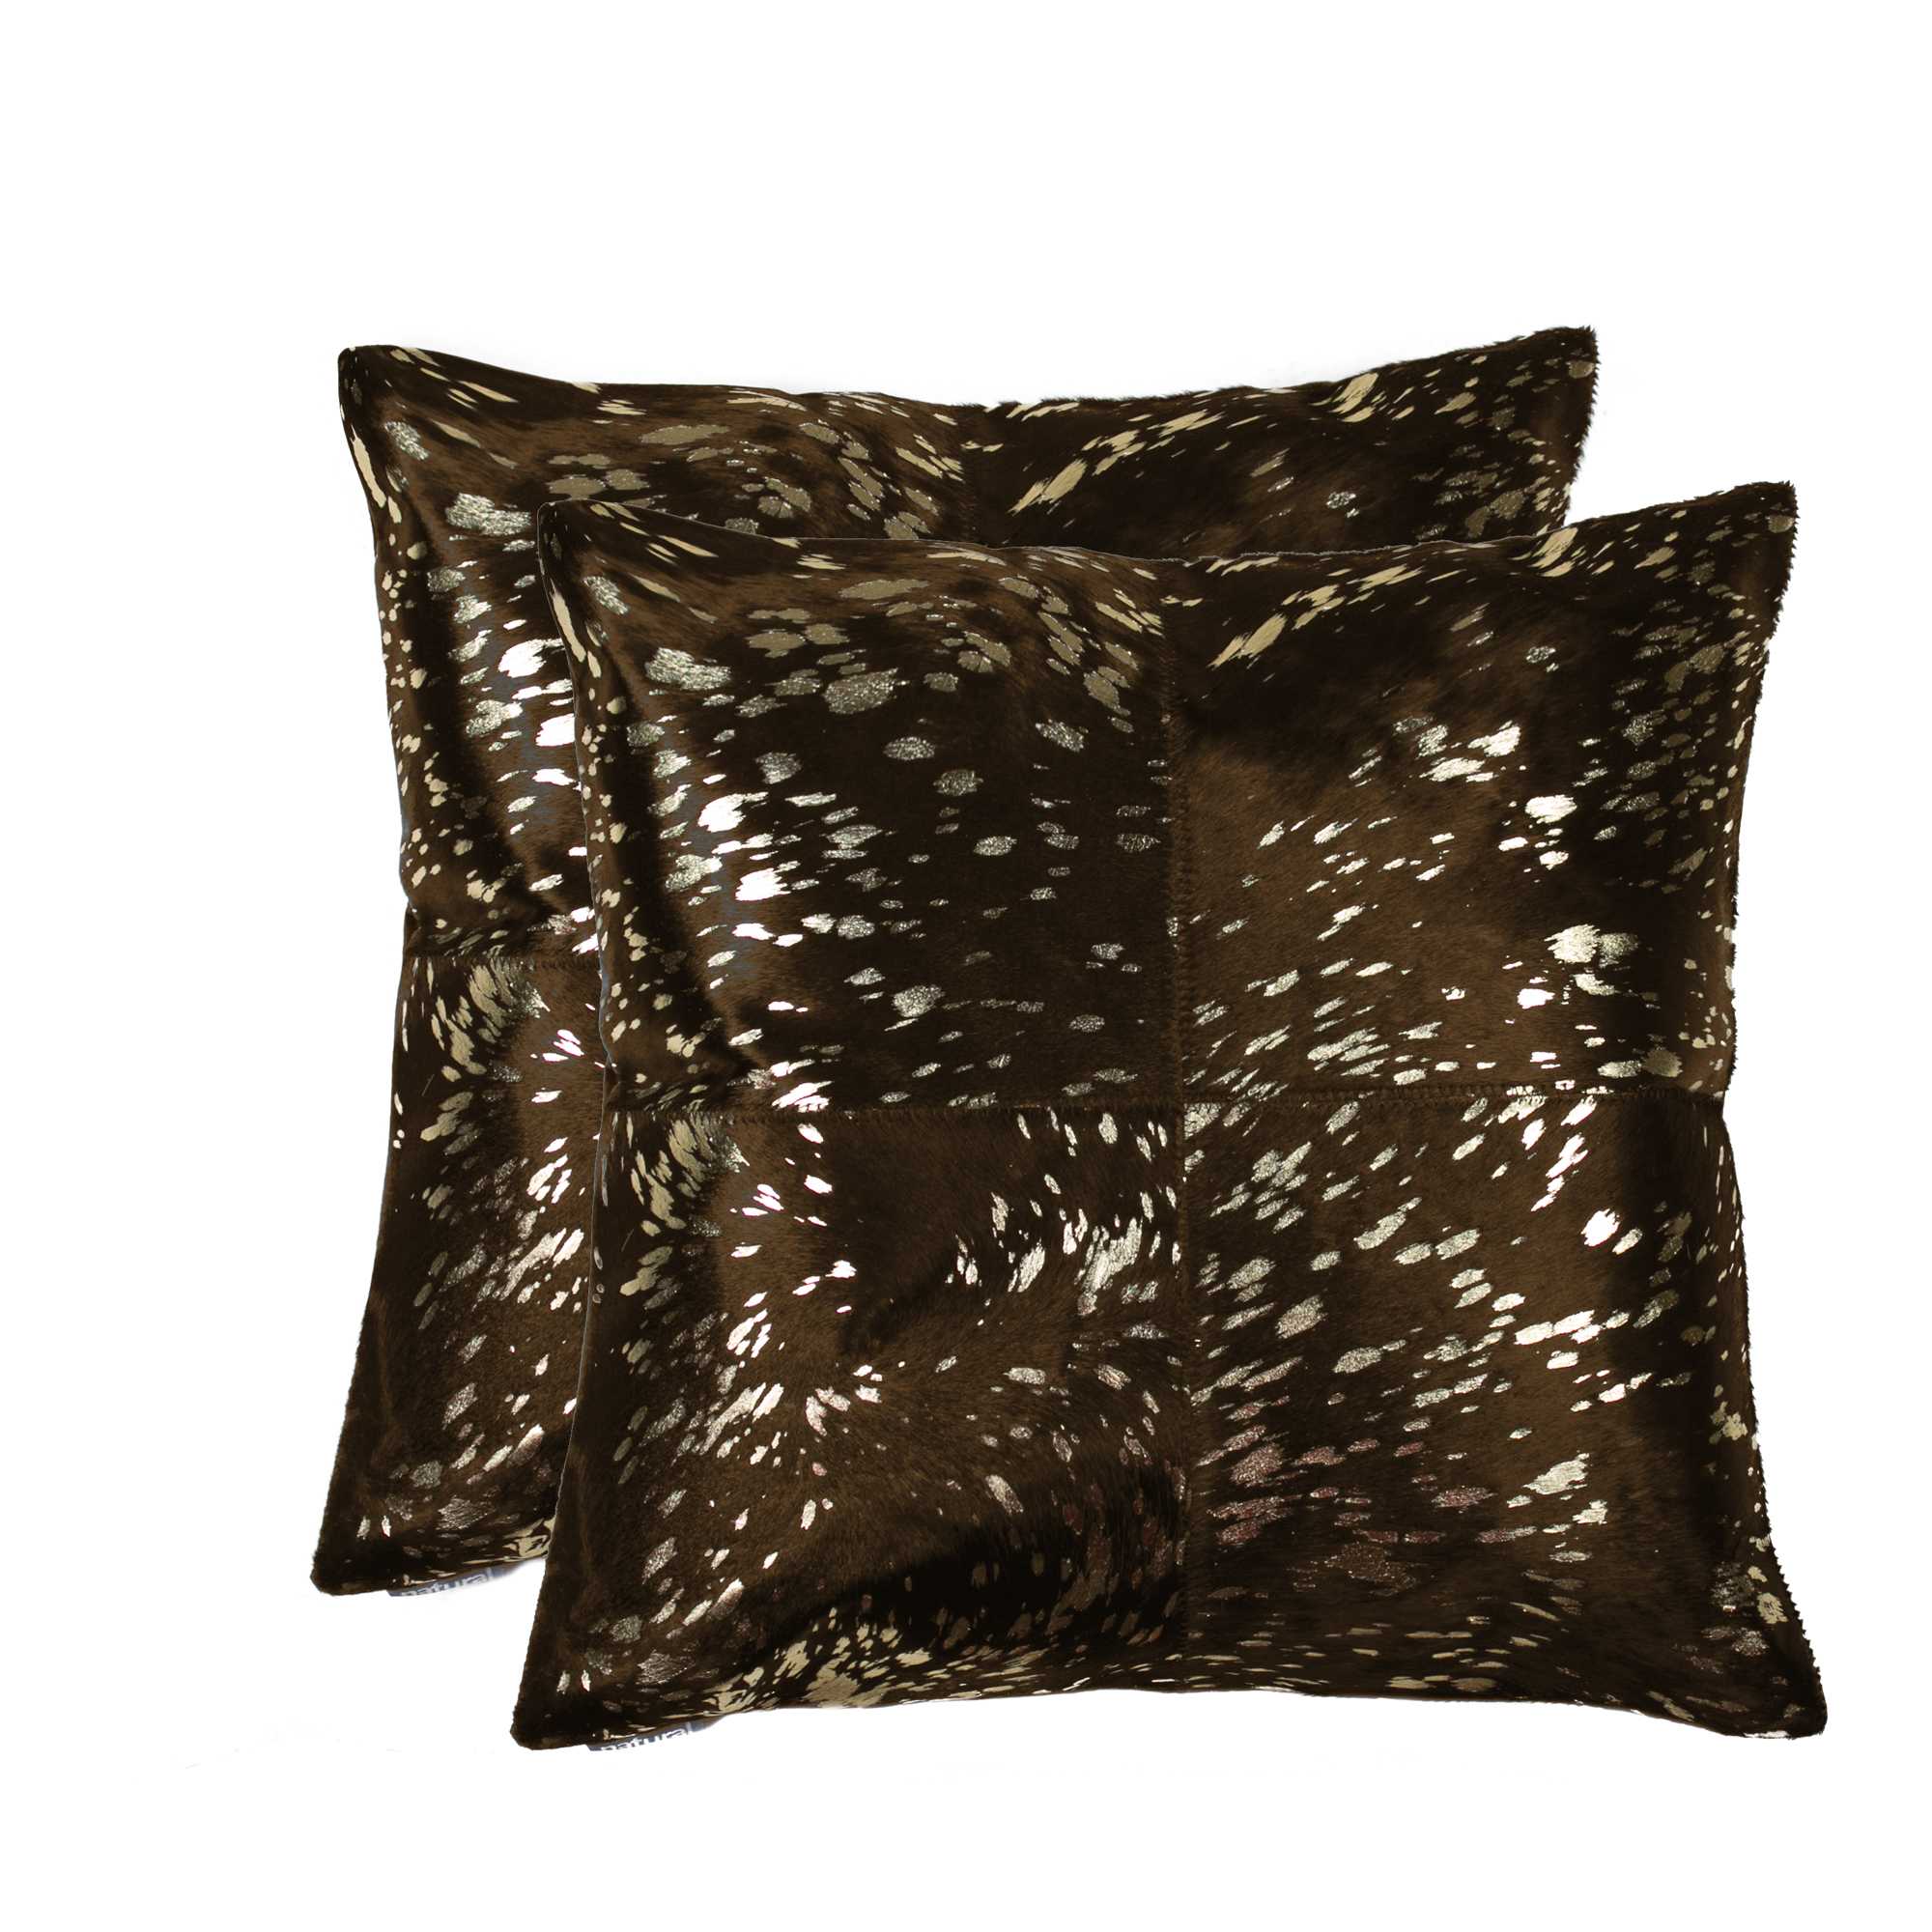 18" x 18" x 5" Gold And Chocolate, Quattro - Pillow 2-Pack